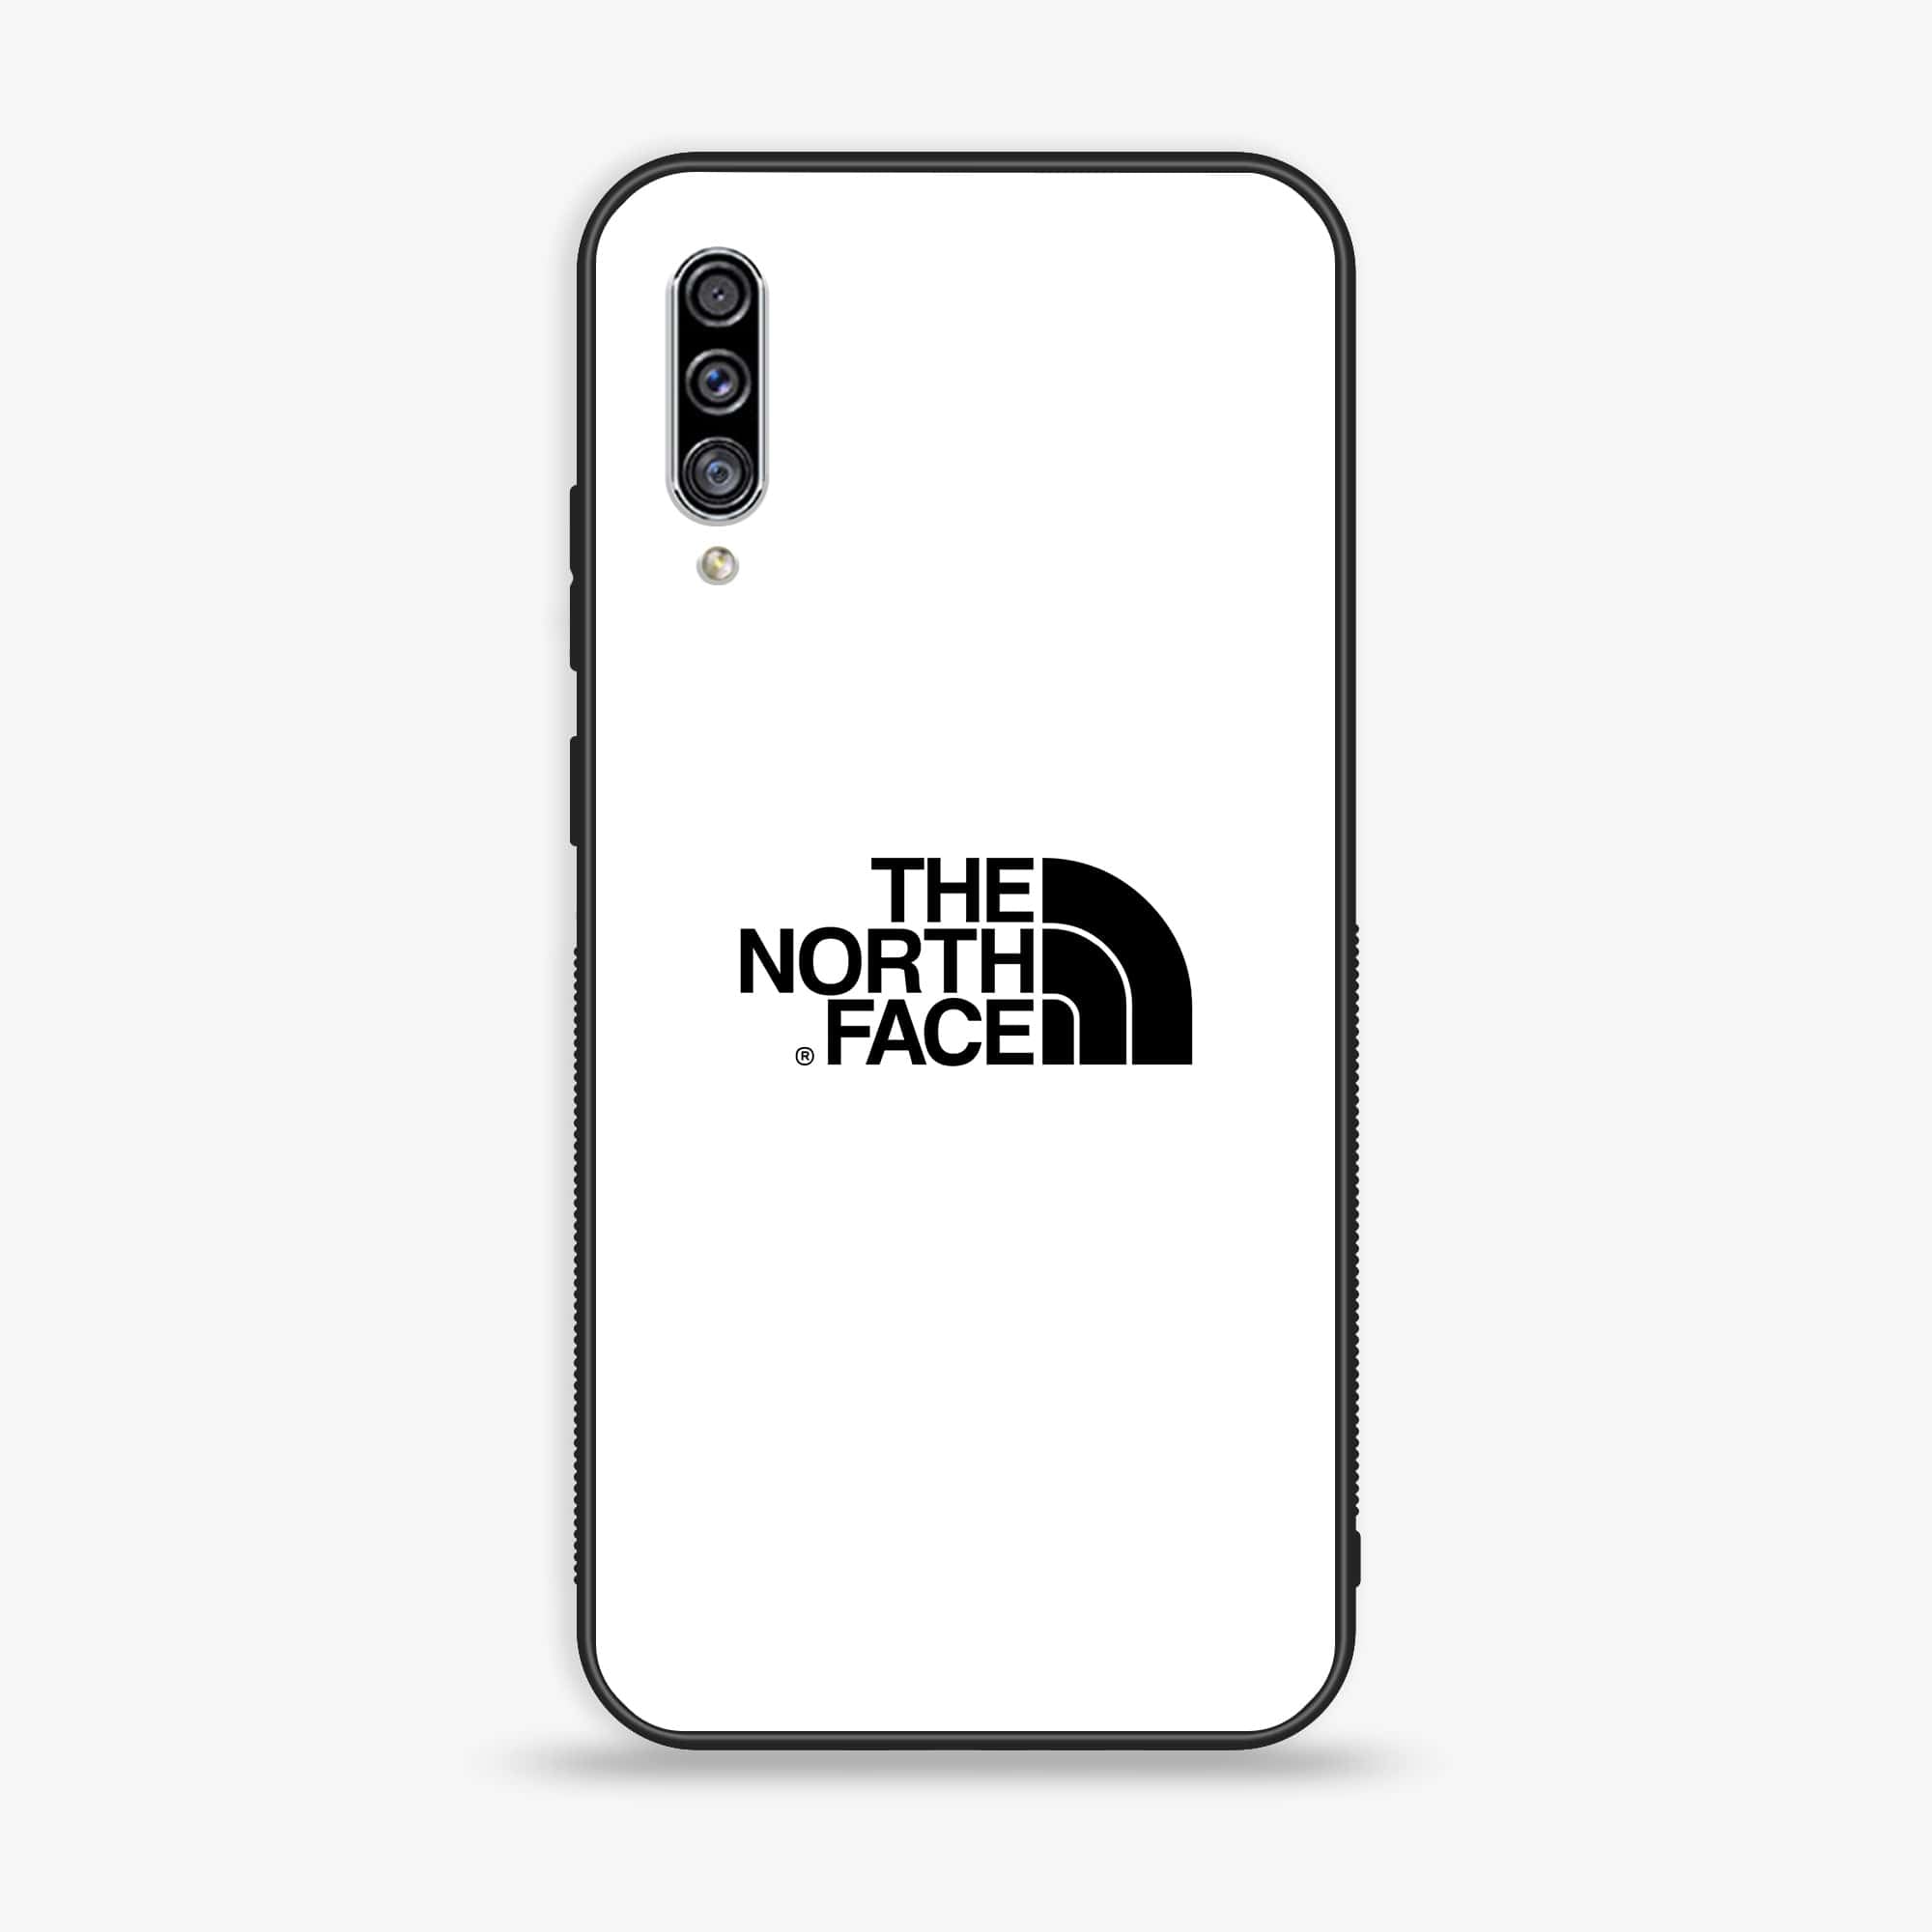 Galaxy A50/ A50s/ A30s - The North Face Series - Premium Printed Glass soft Bumper shock Proof Case